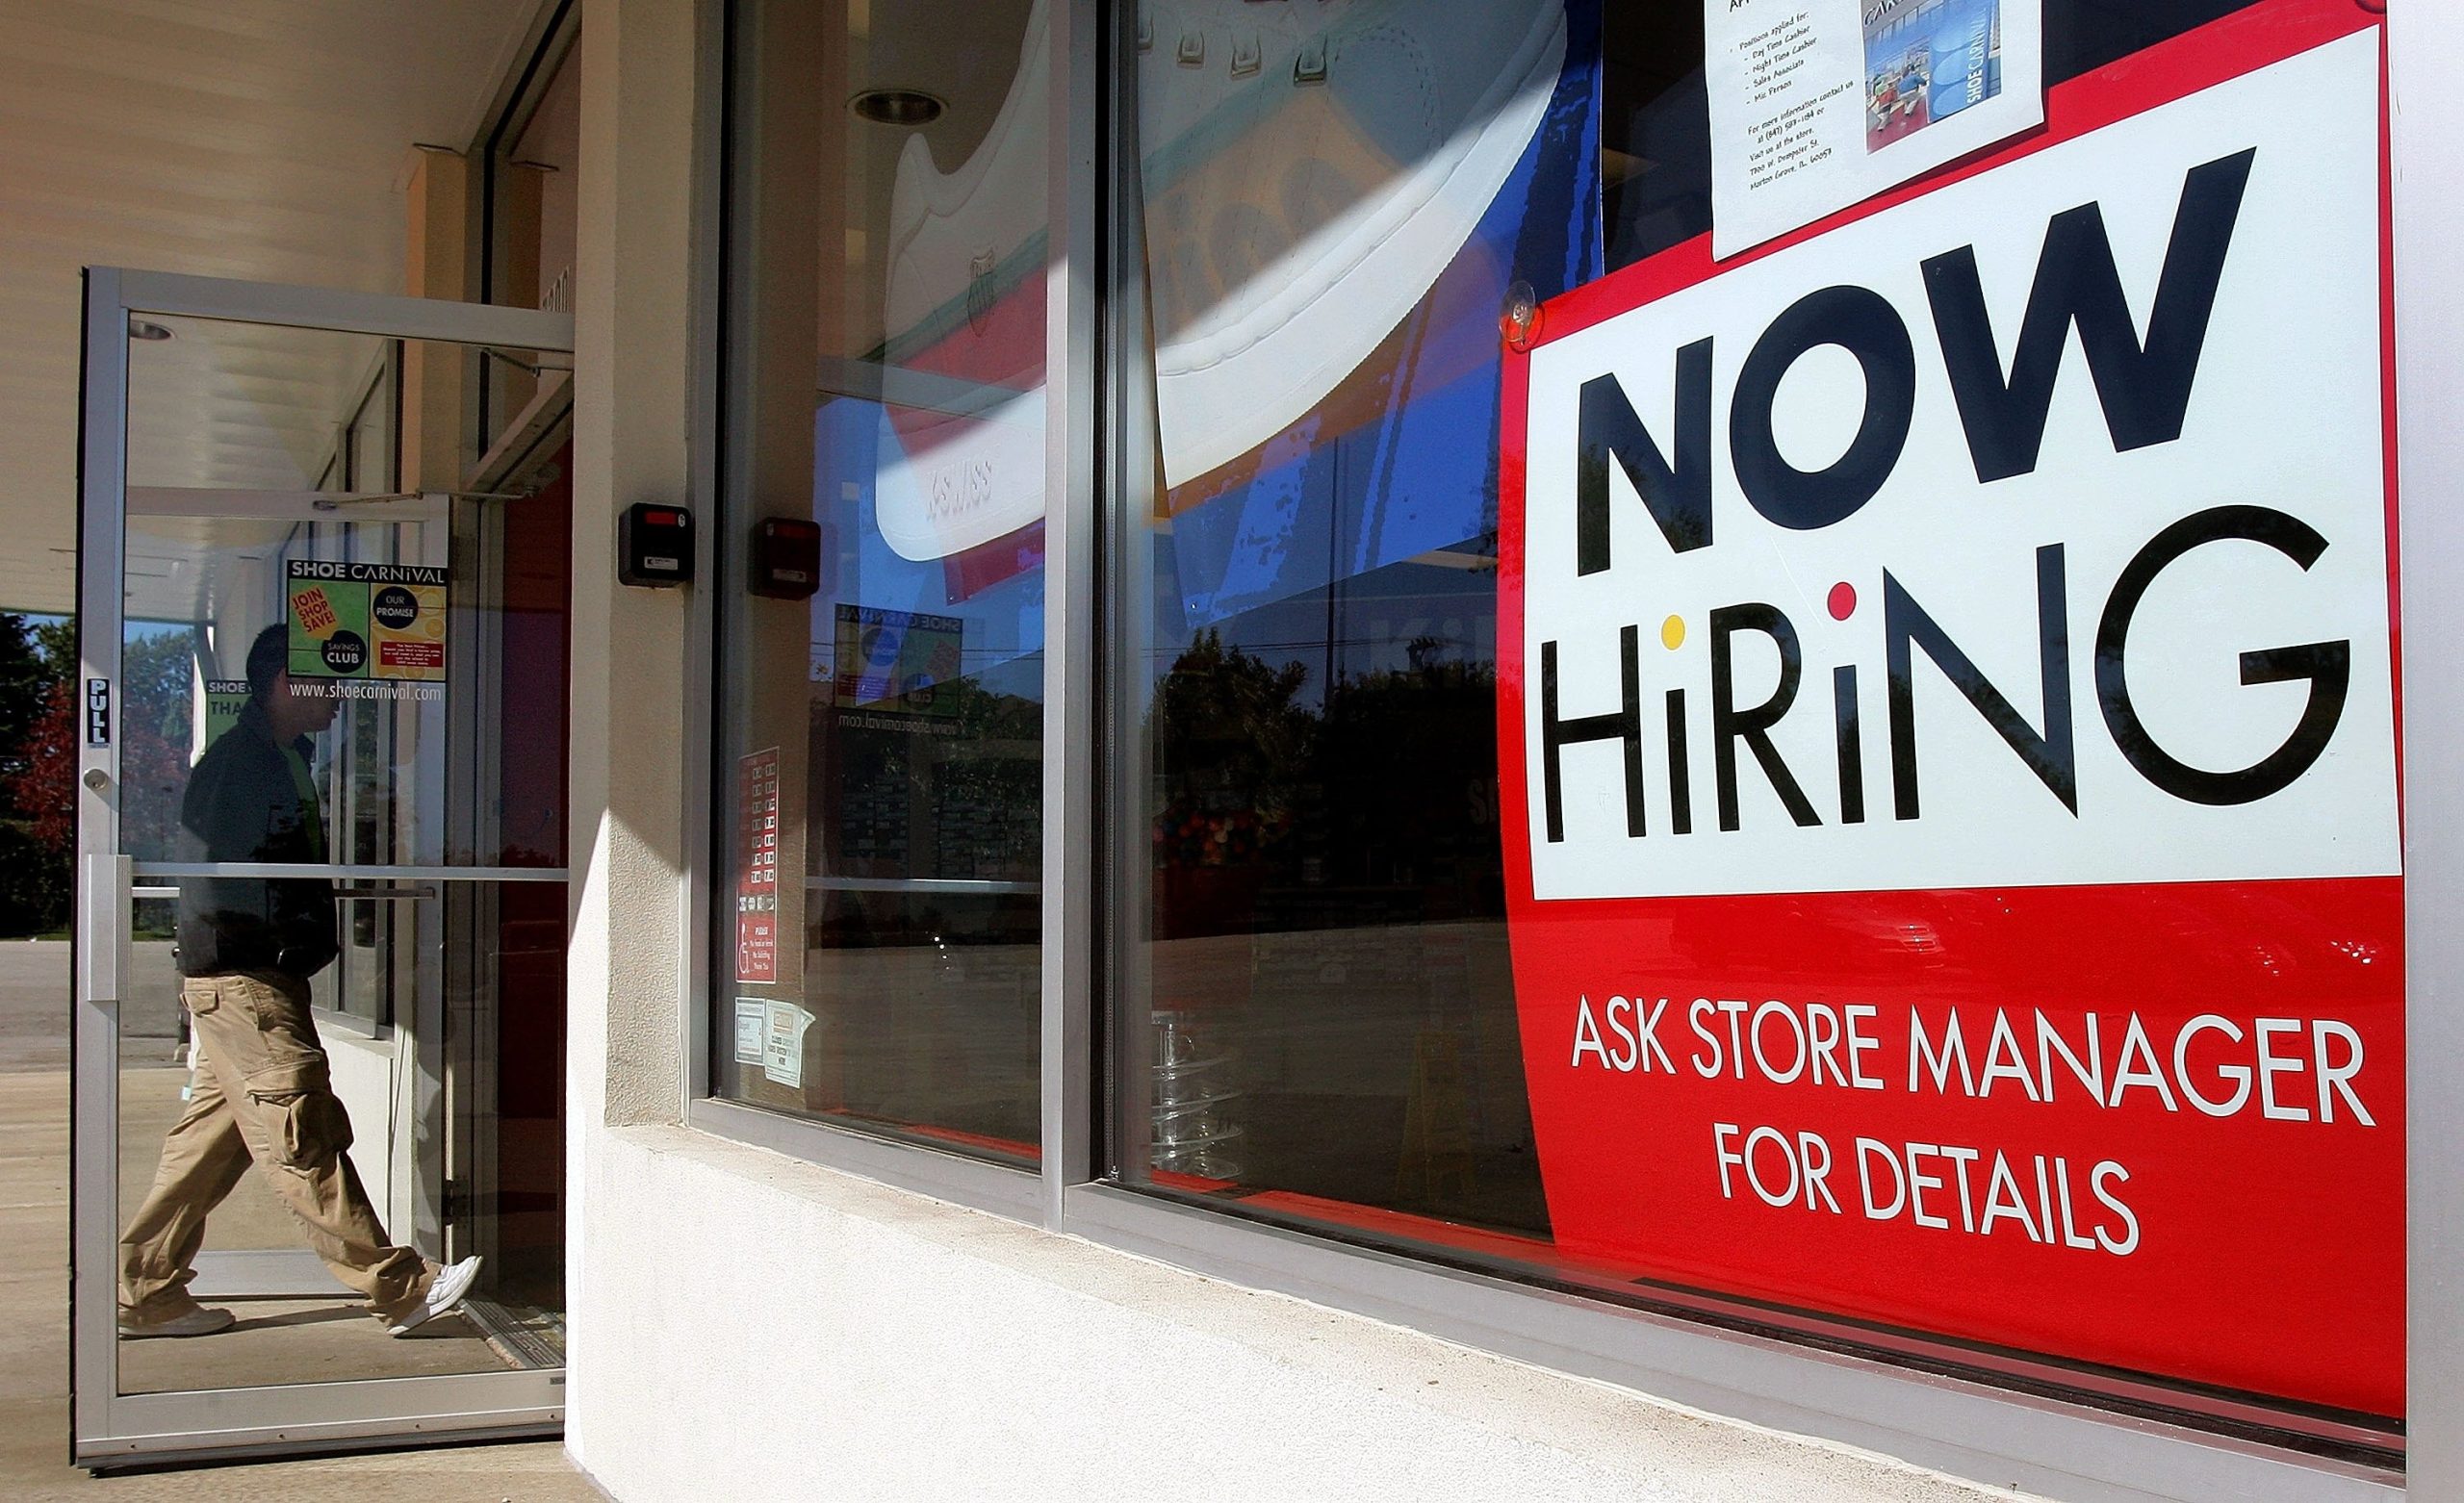 In January, U.S. Employers Added a Surprisingly Strong 353,000 Jobs, Reflecting Continued Economic Resilience